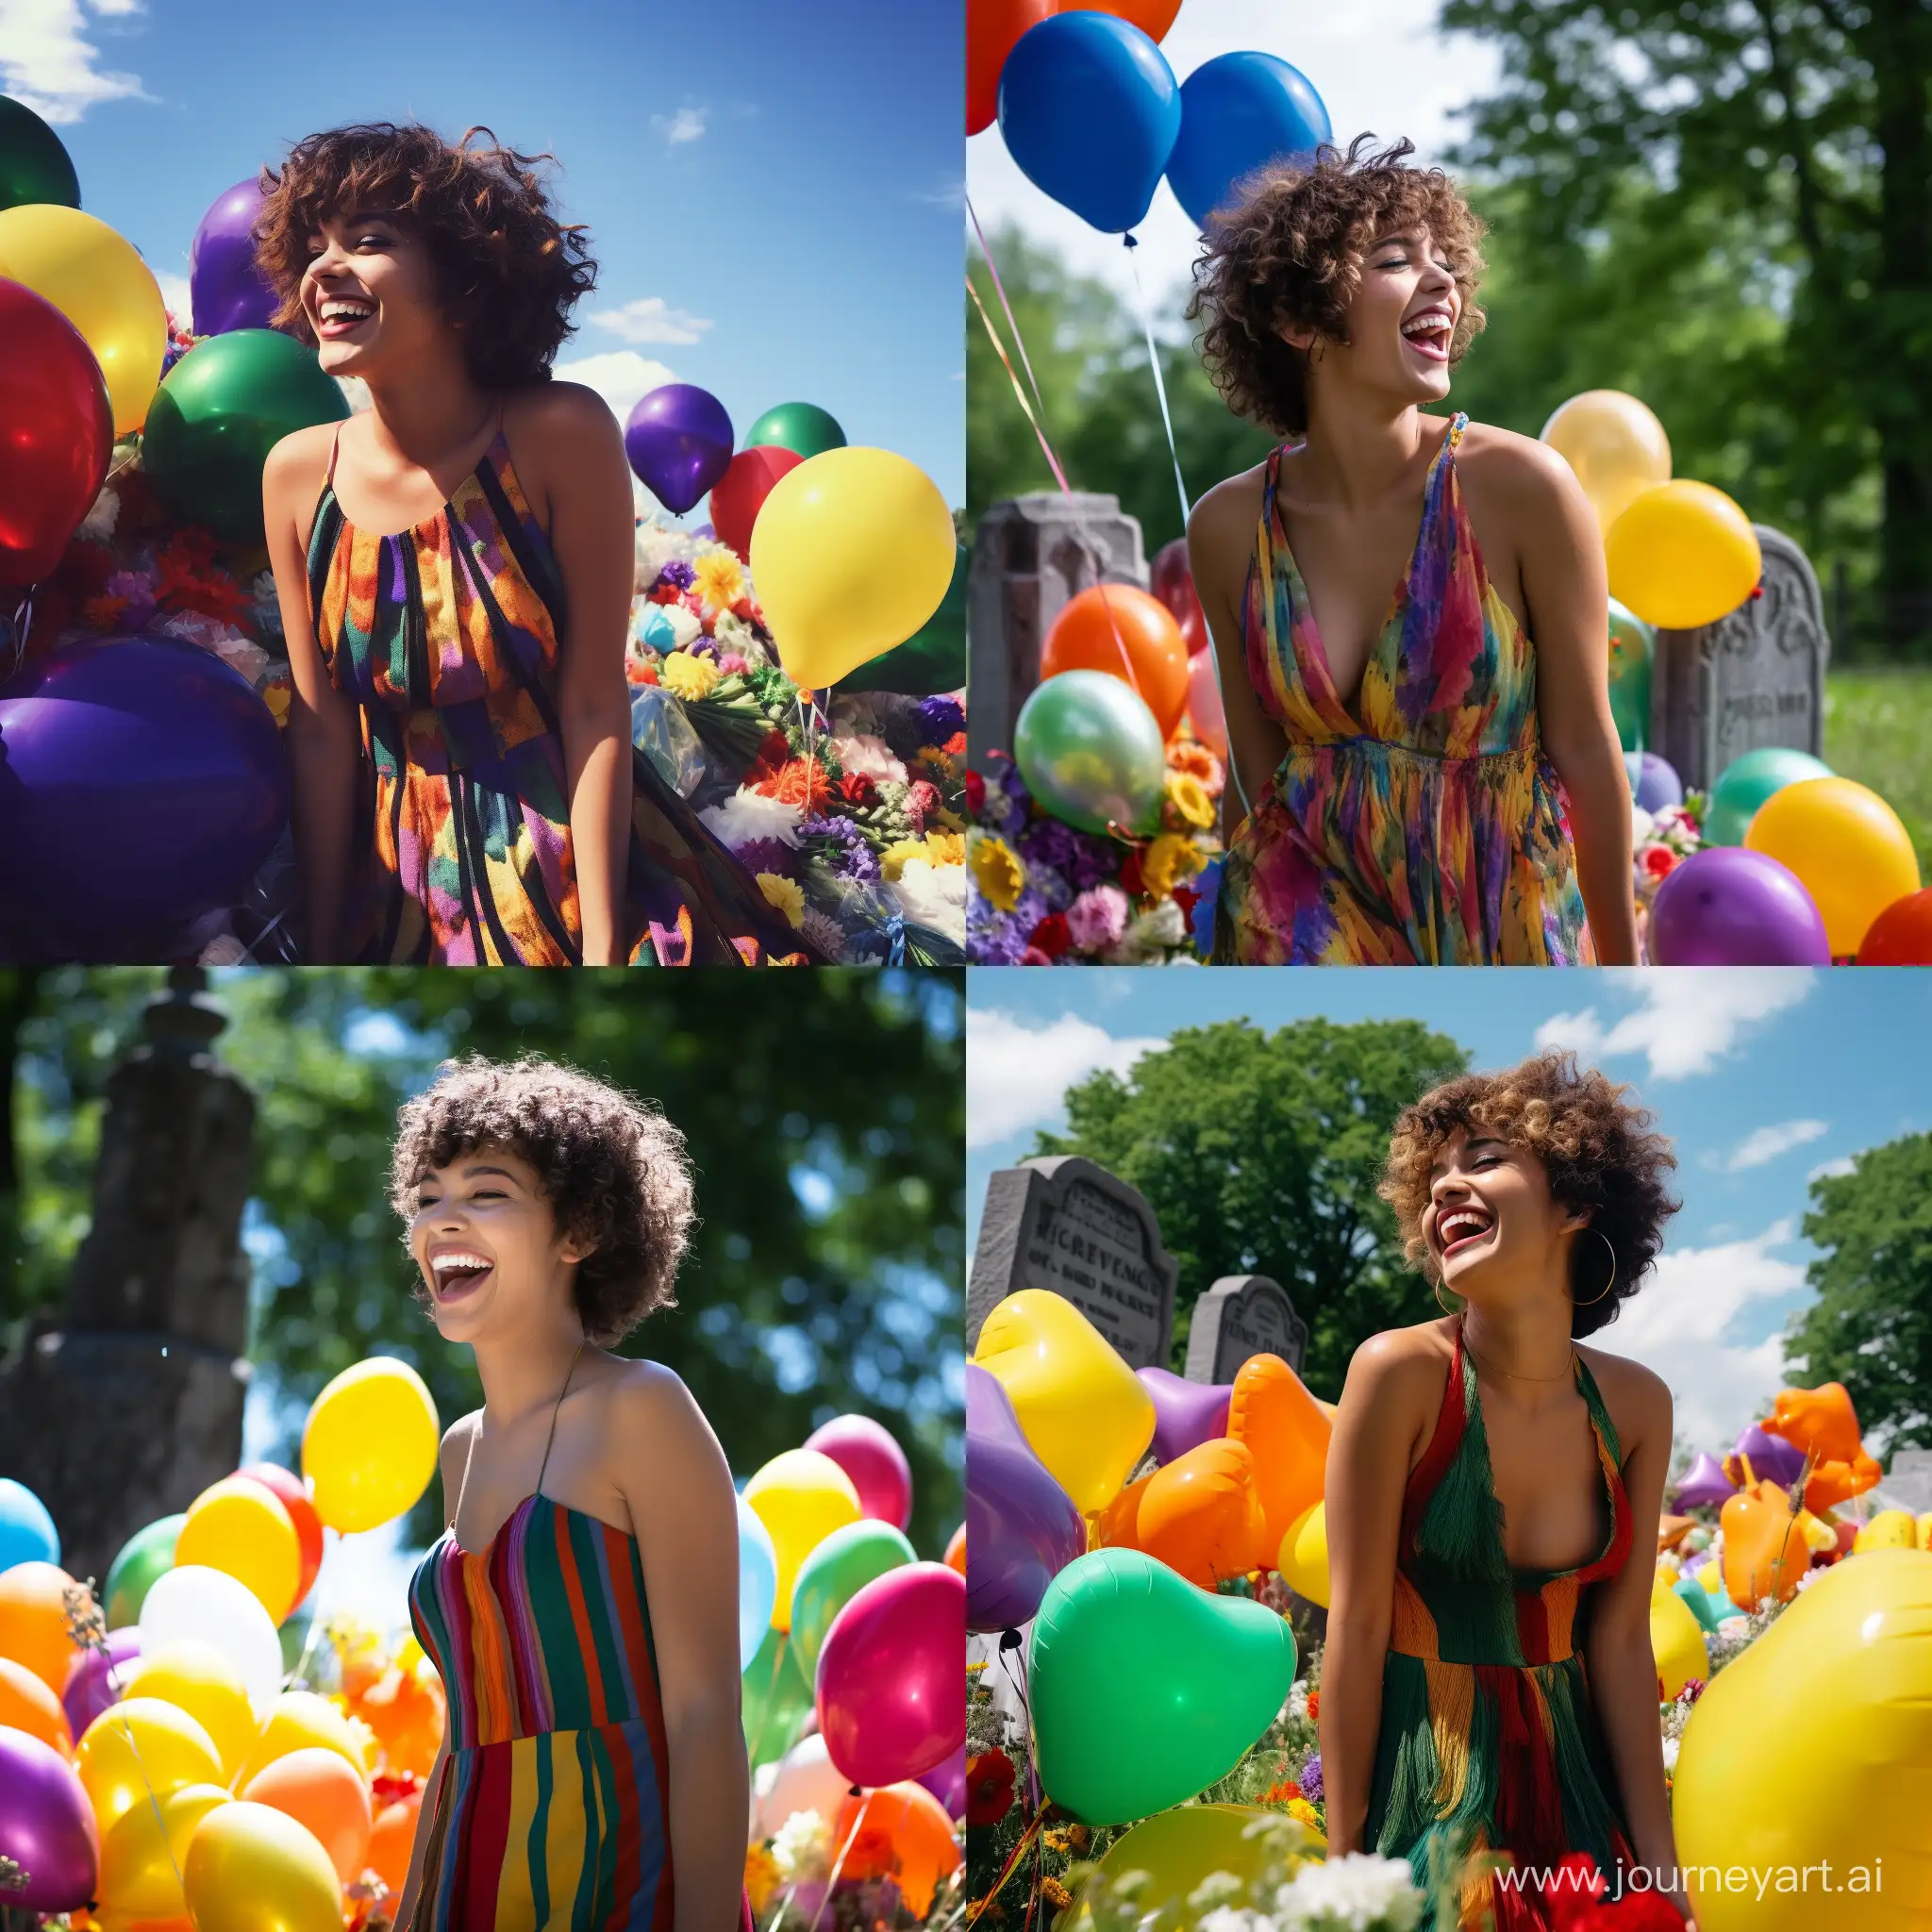 Vibrant-Life-Amidst-Serenity-Joyful-Hispanic-Woman-with-Colorful-Balloons-in-a-Graveyard